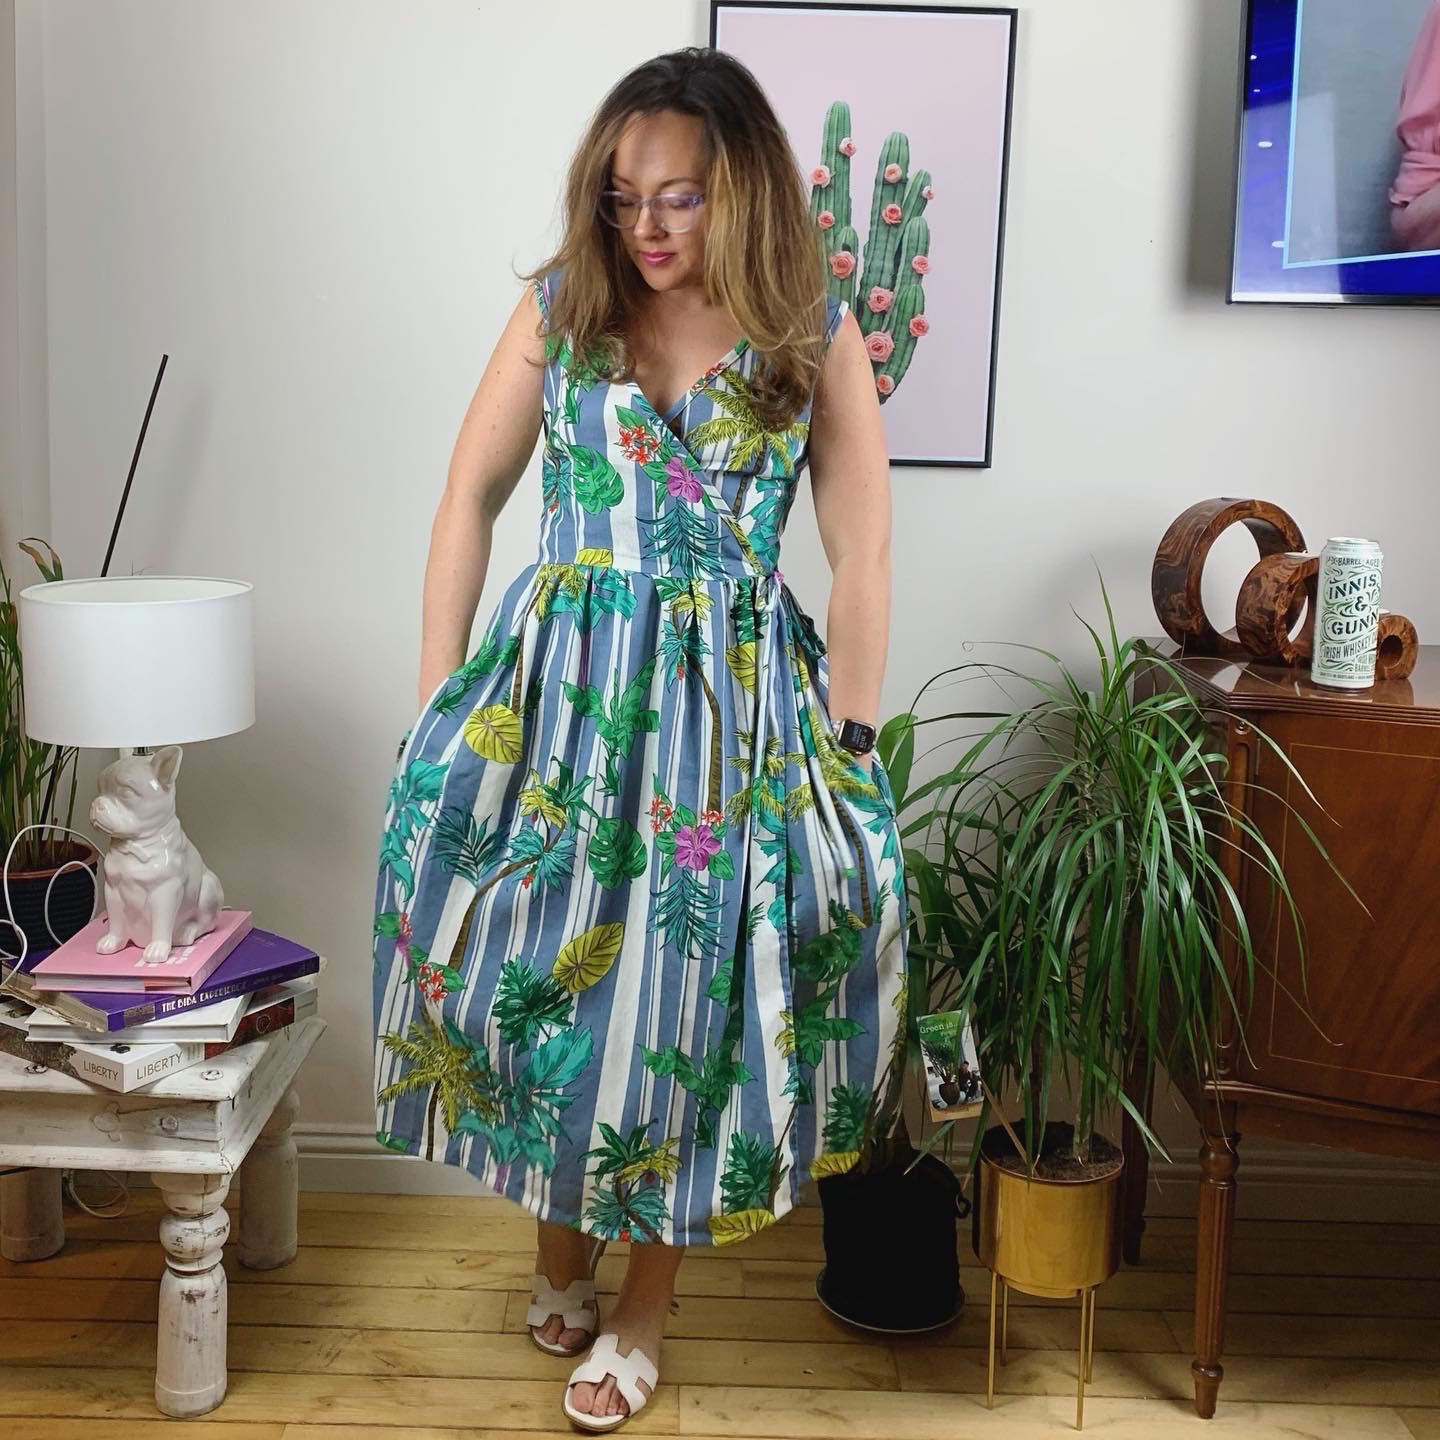 sew along hannah dress - 21st of june outfit